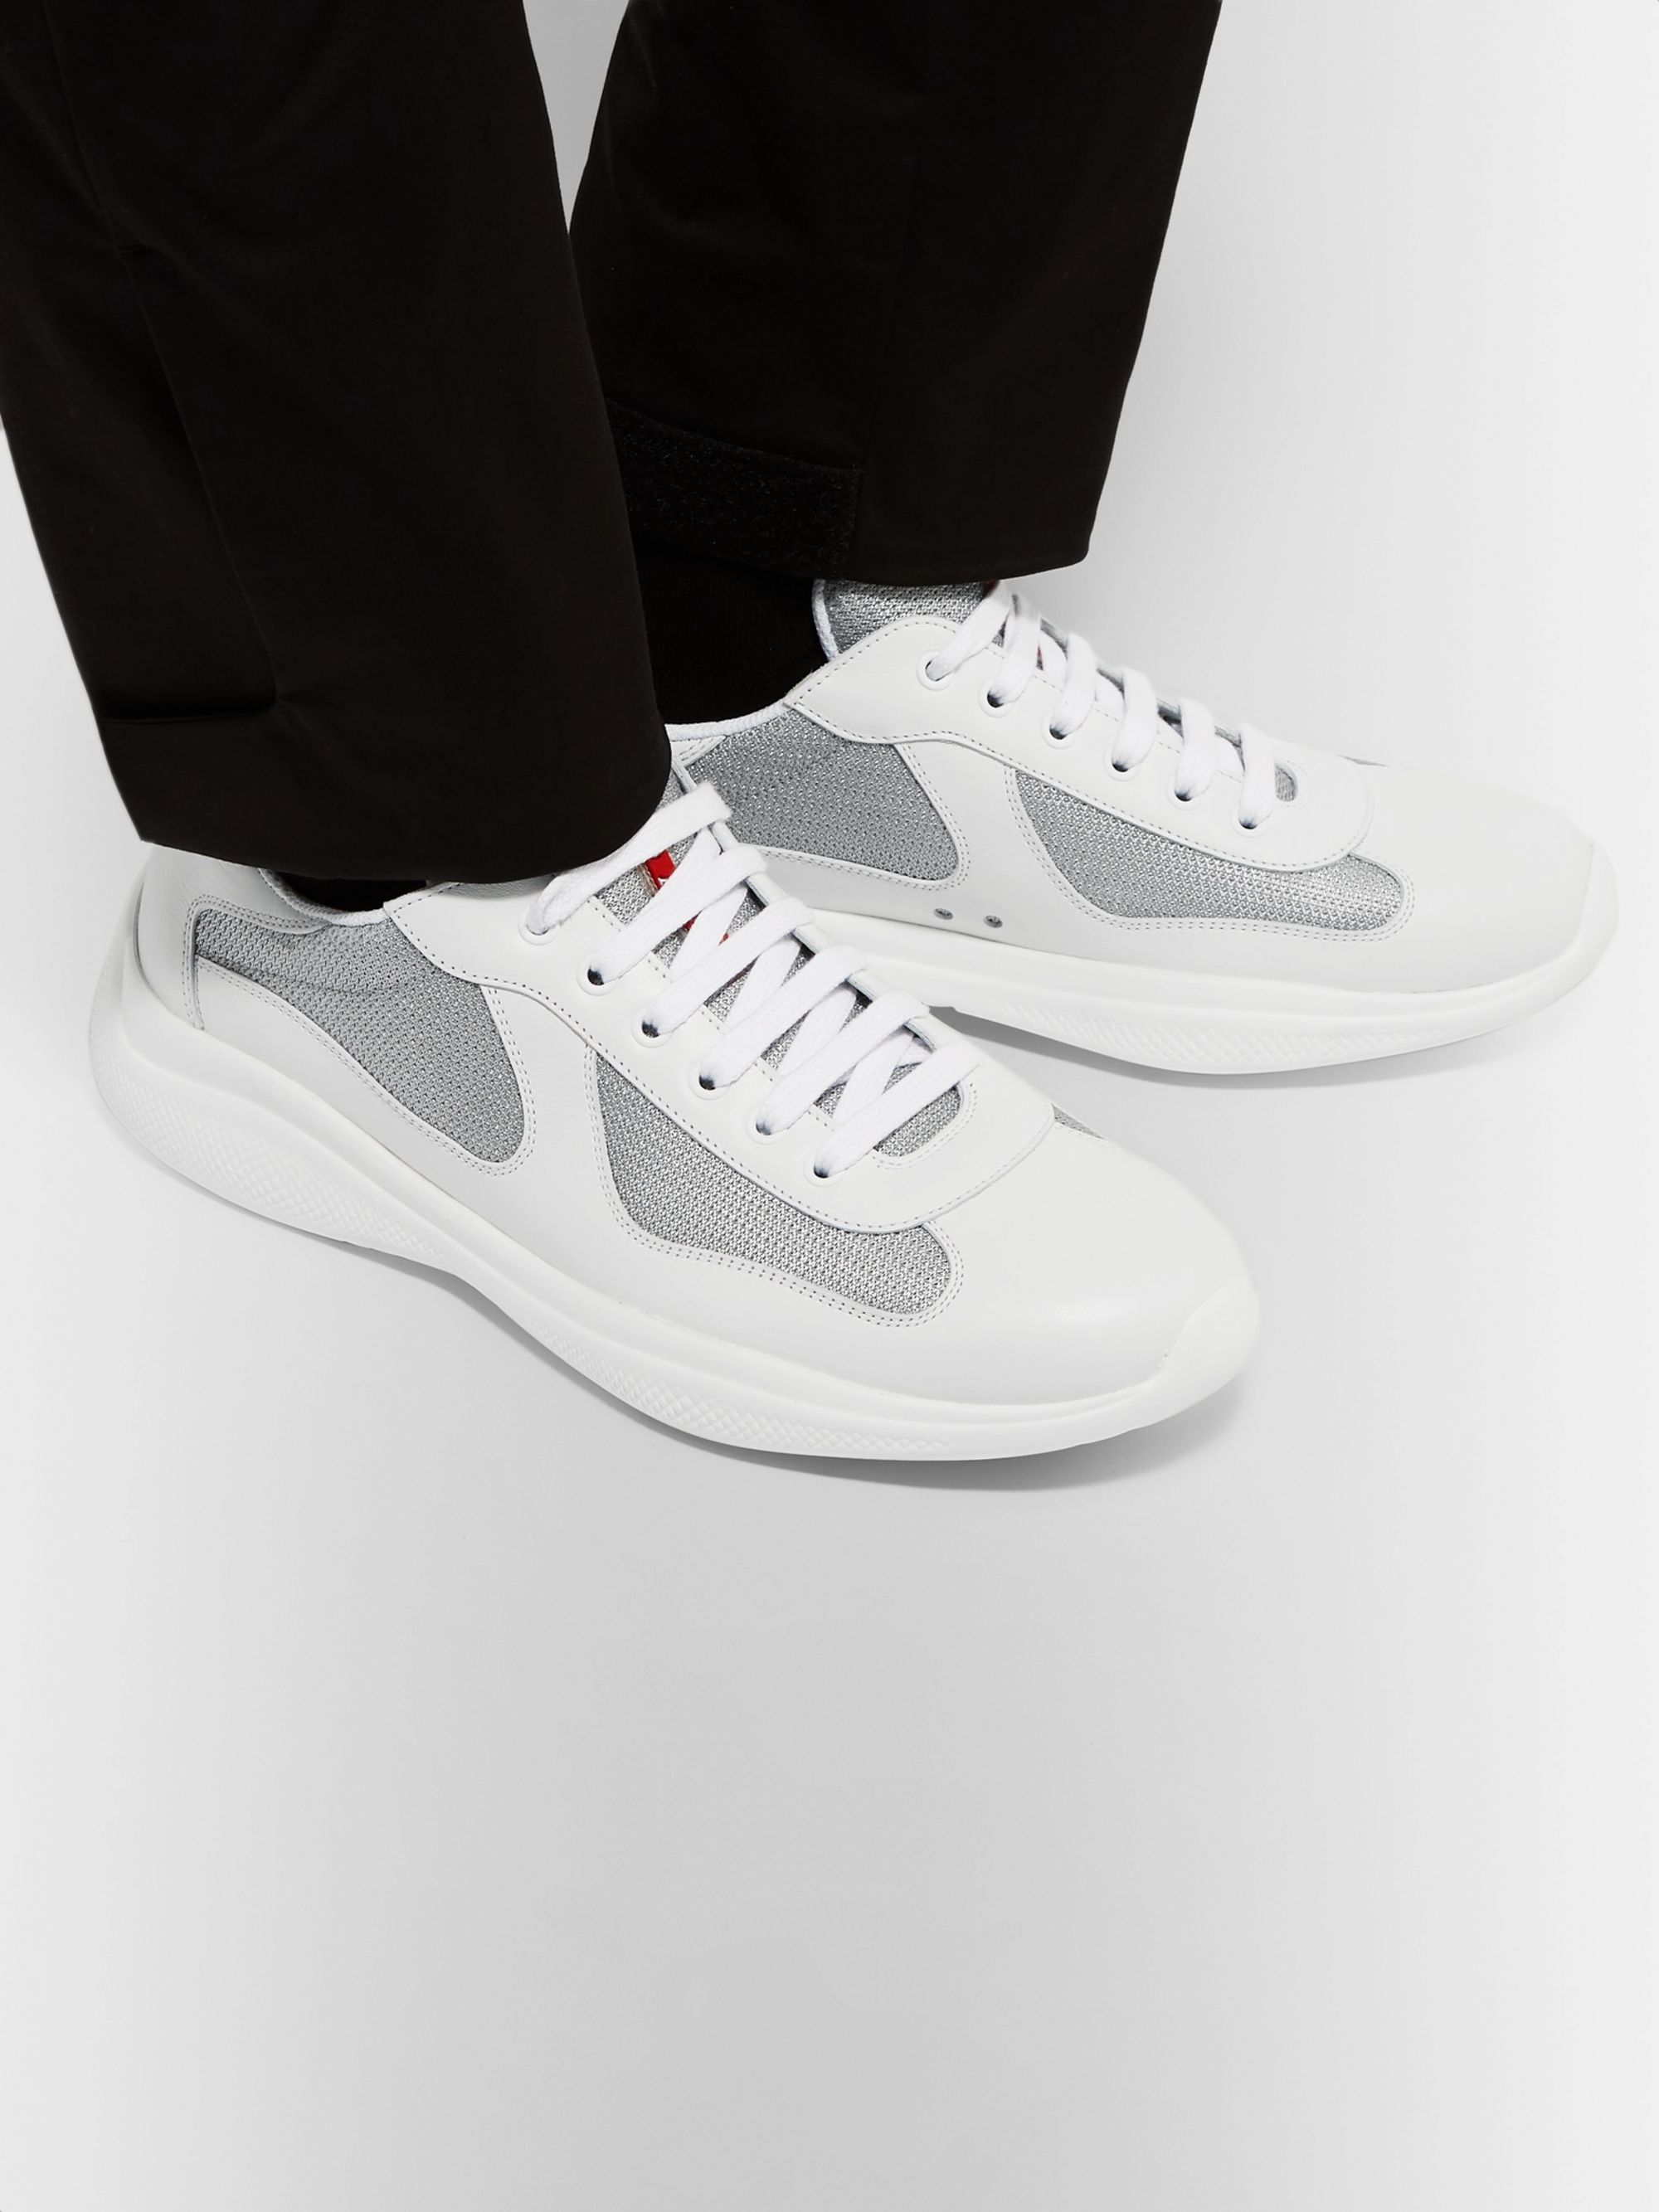 prada america's cup leather and mesh sneakers